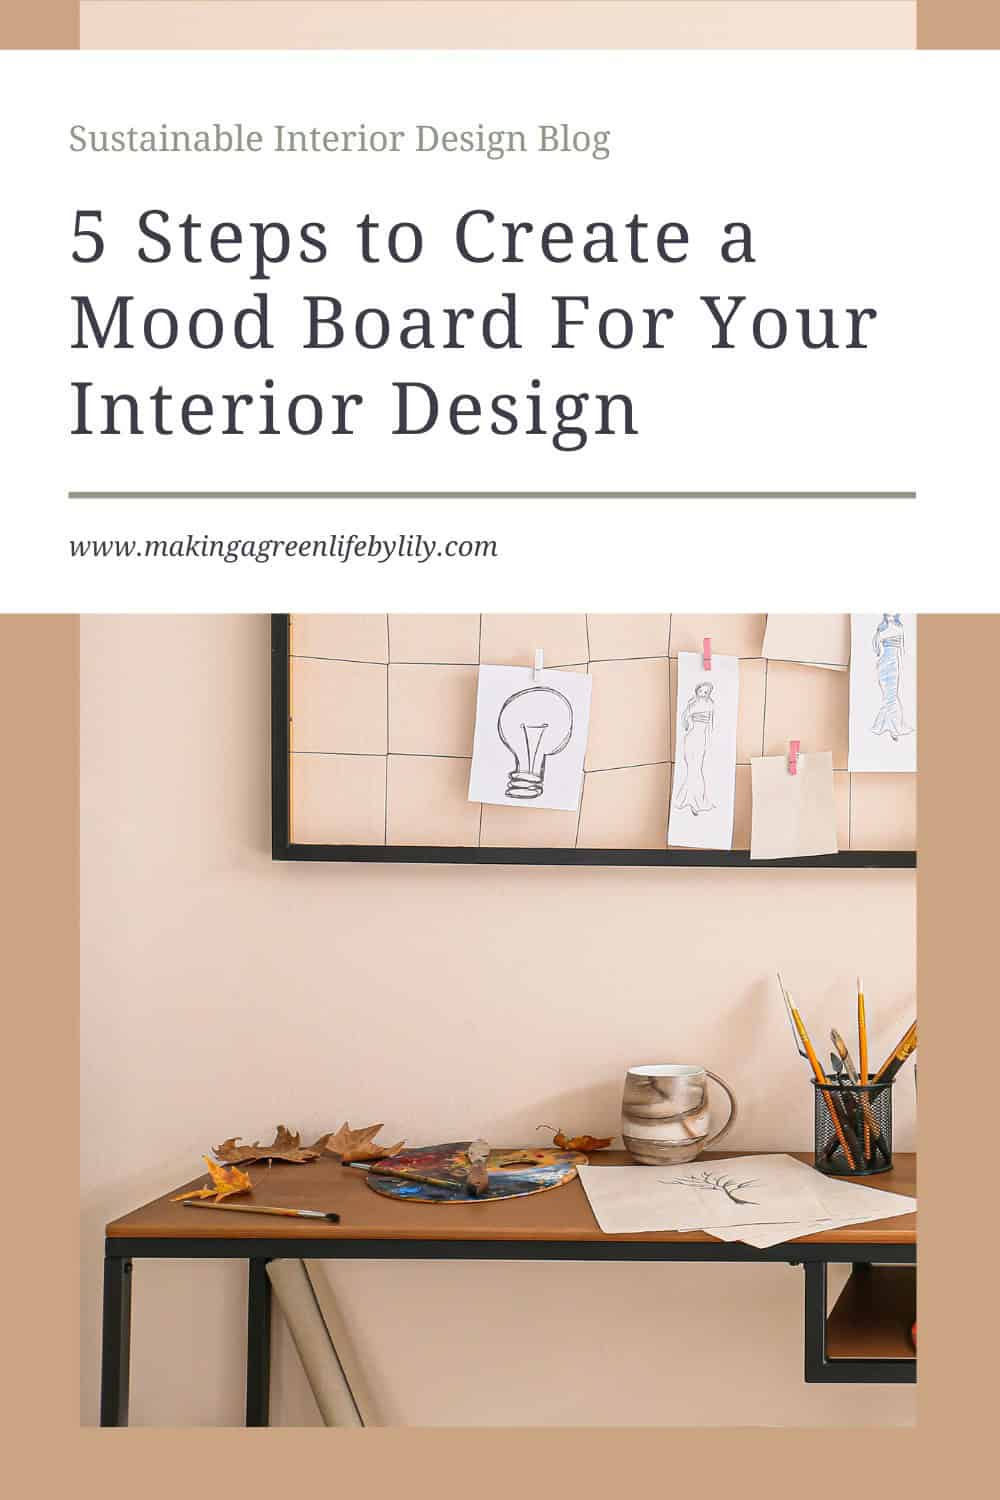 5 Steps to Create a mood board for your interior design